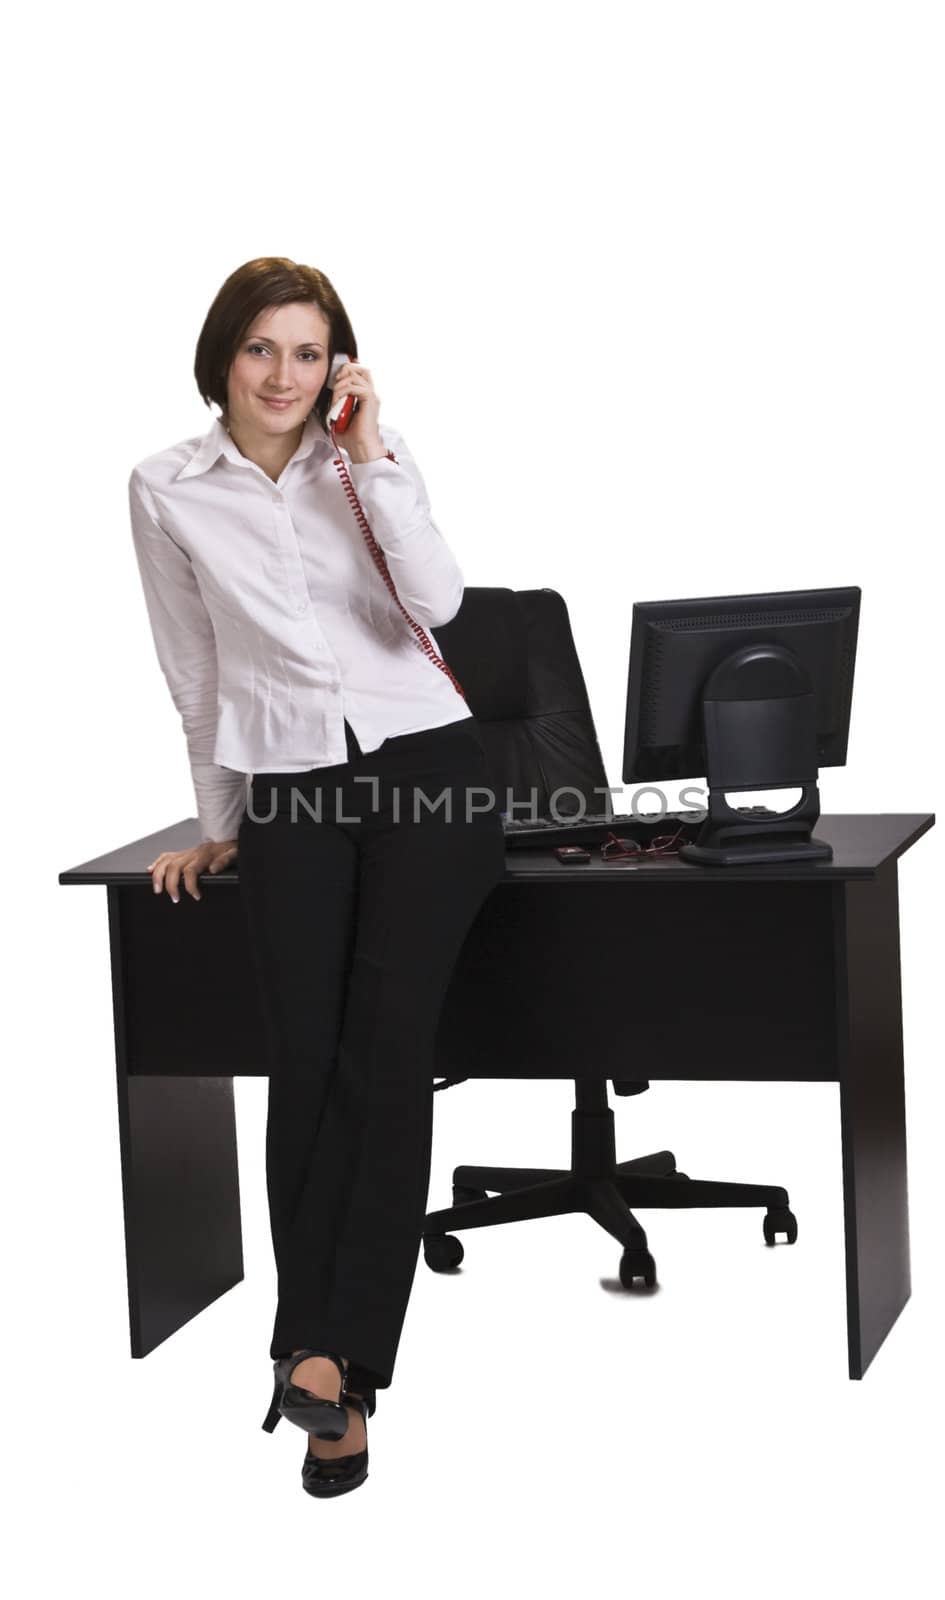 Young businesswoman on the phone leaning against her desk, isolated against a white background.